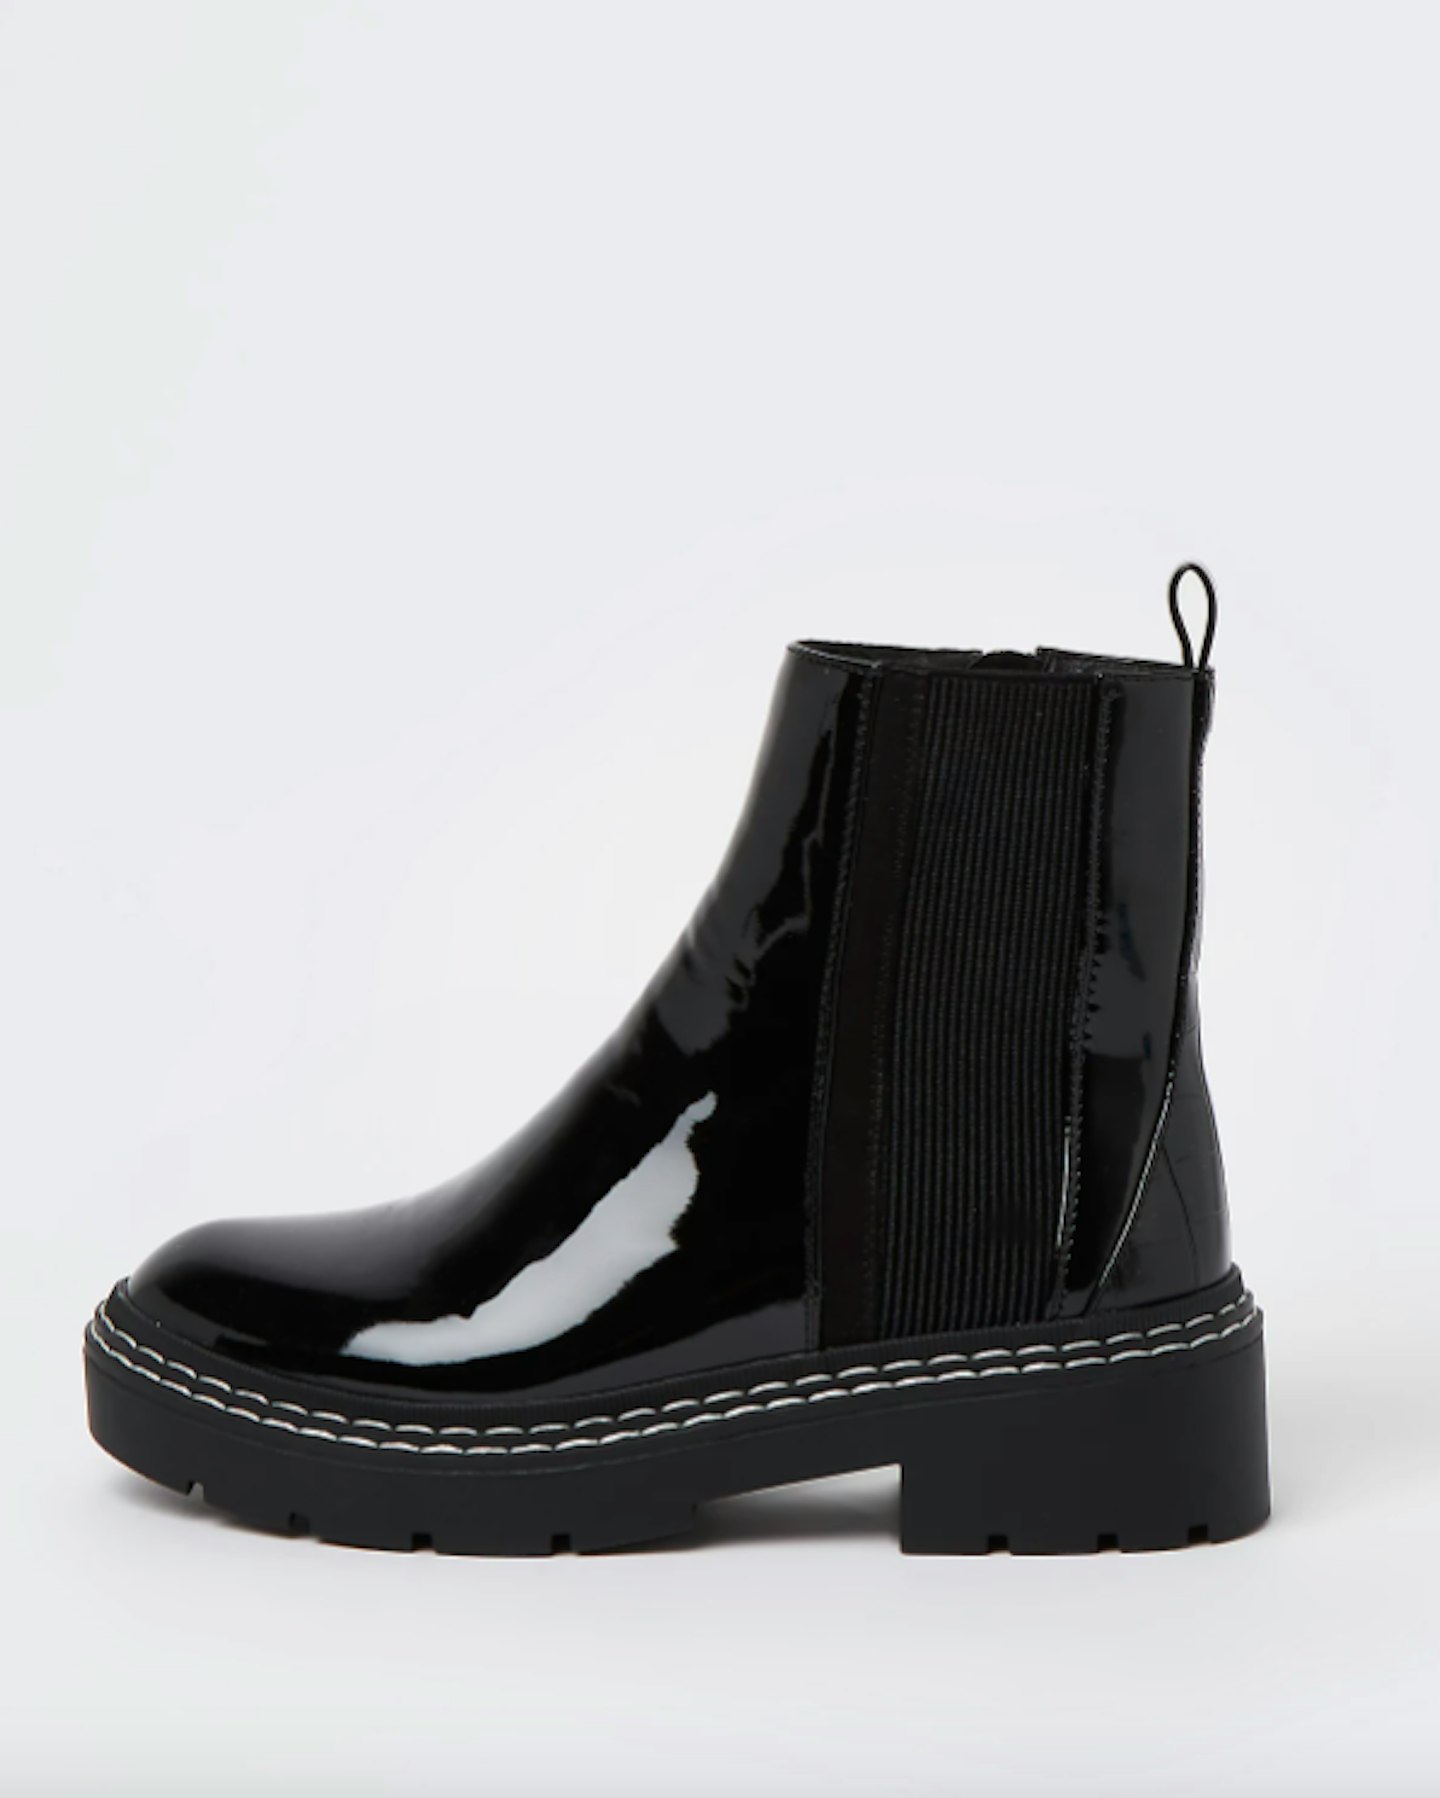 Black Patent Chelsea Boots, WAS £45 NOW £32